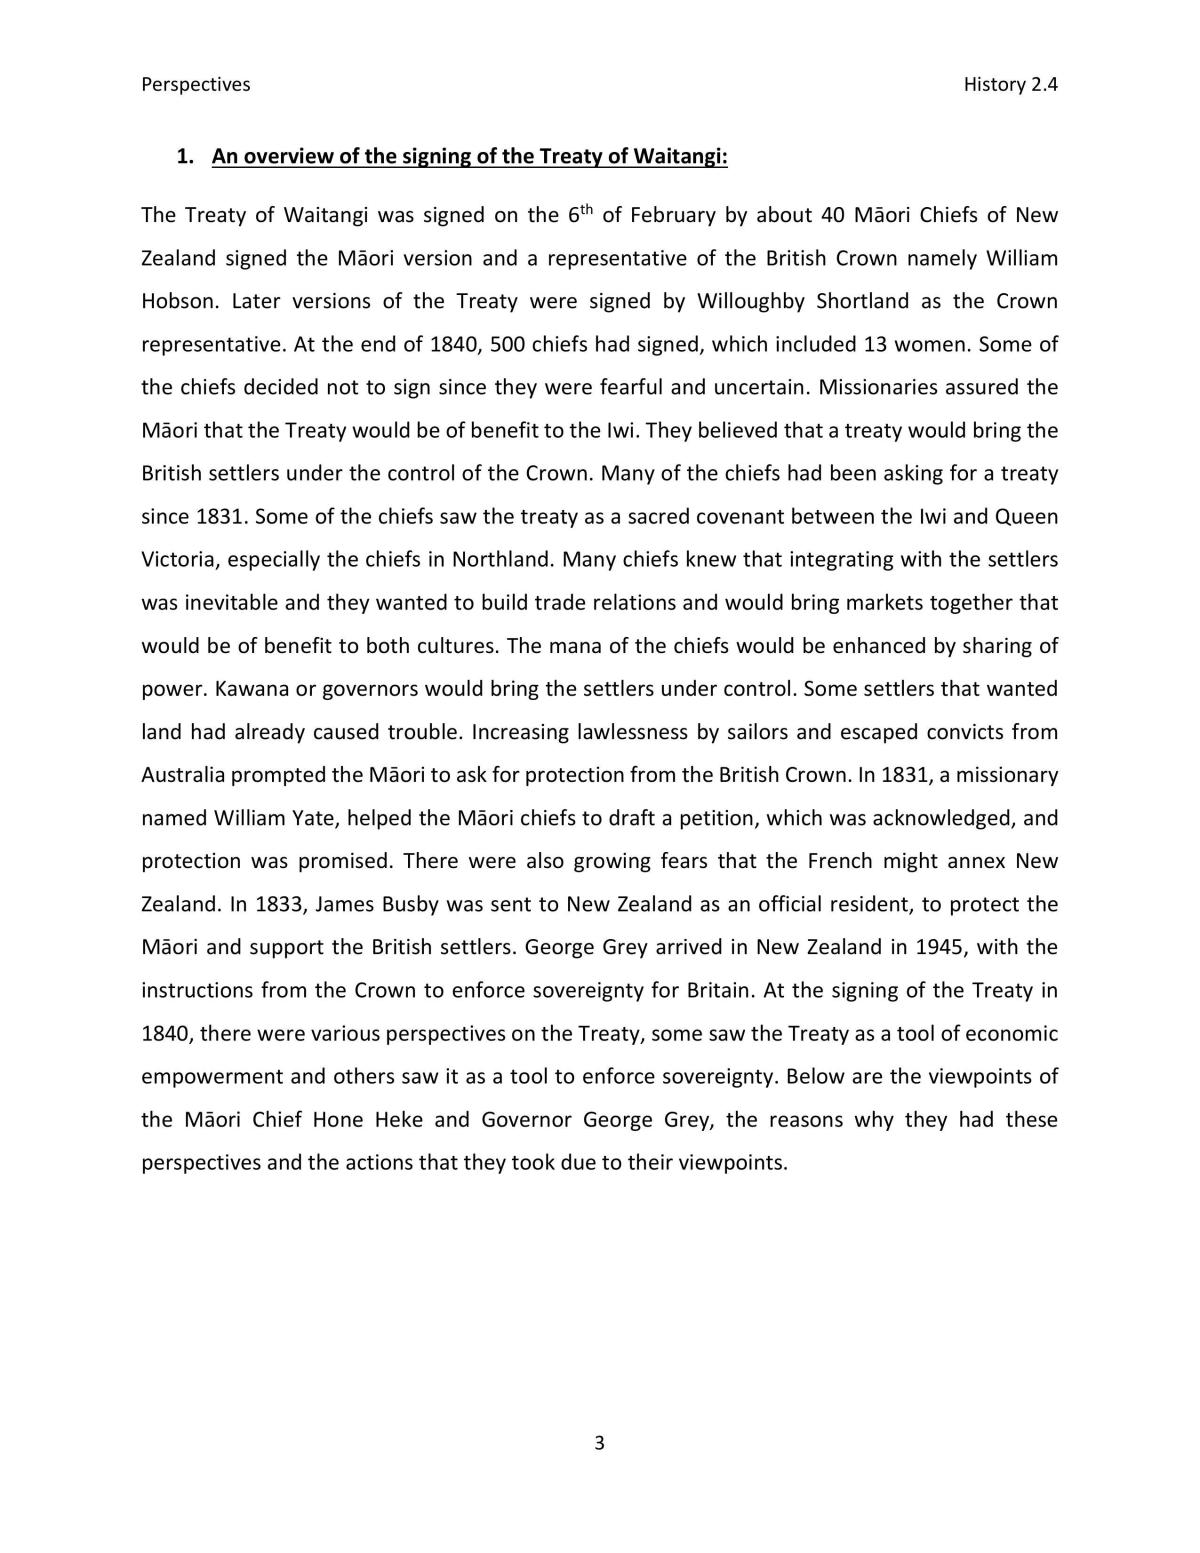 Two opposing perspectives on the Treaty of Waitangi - Page 3